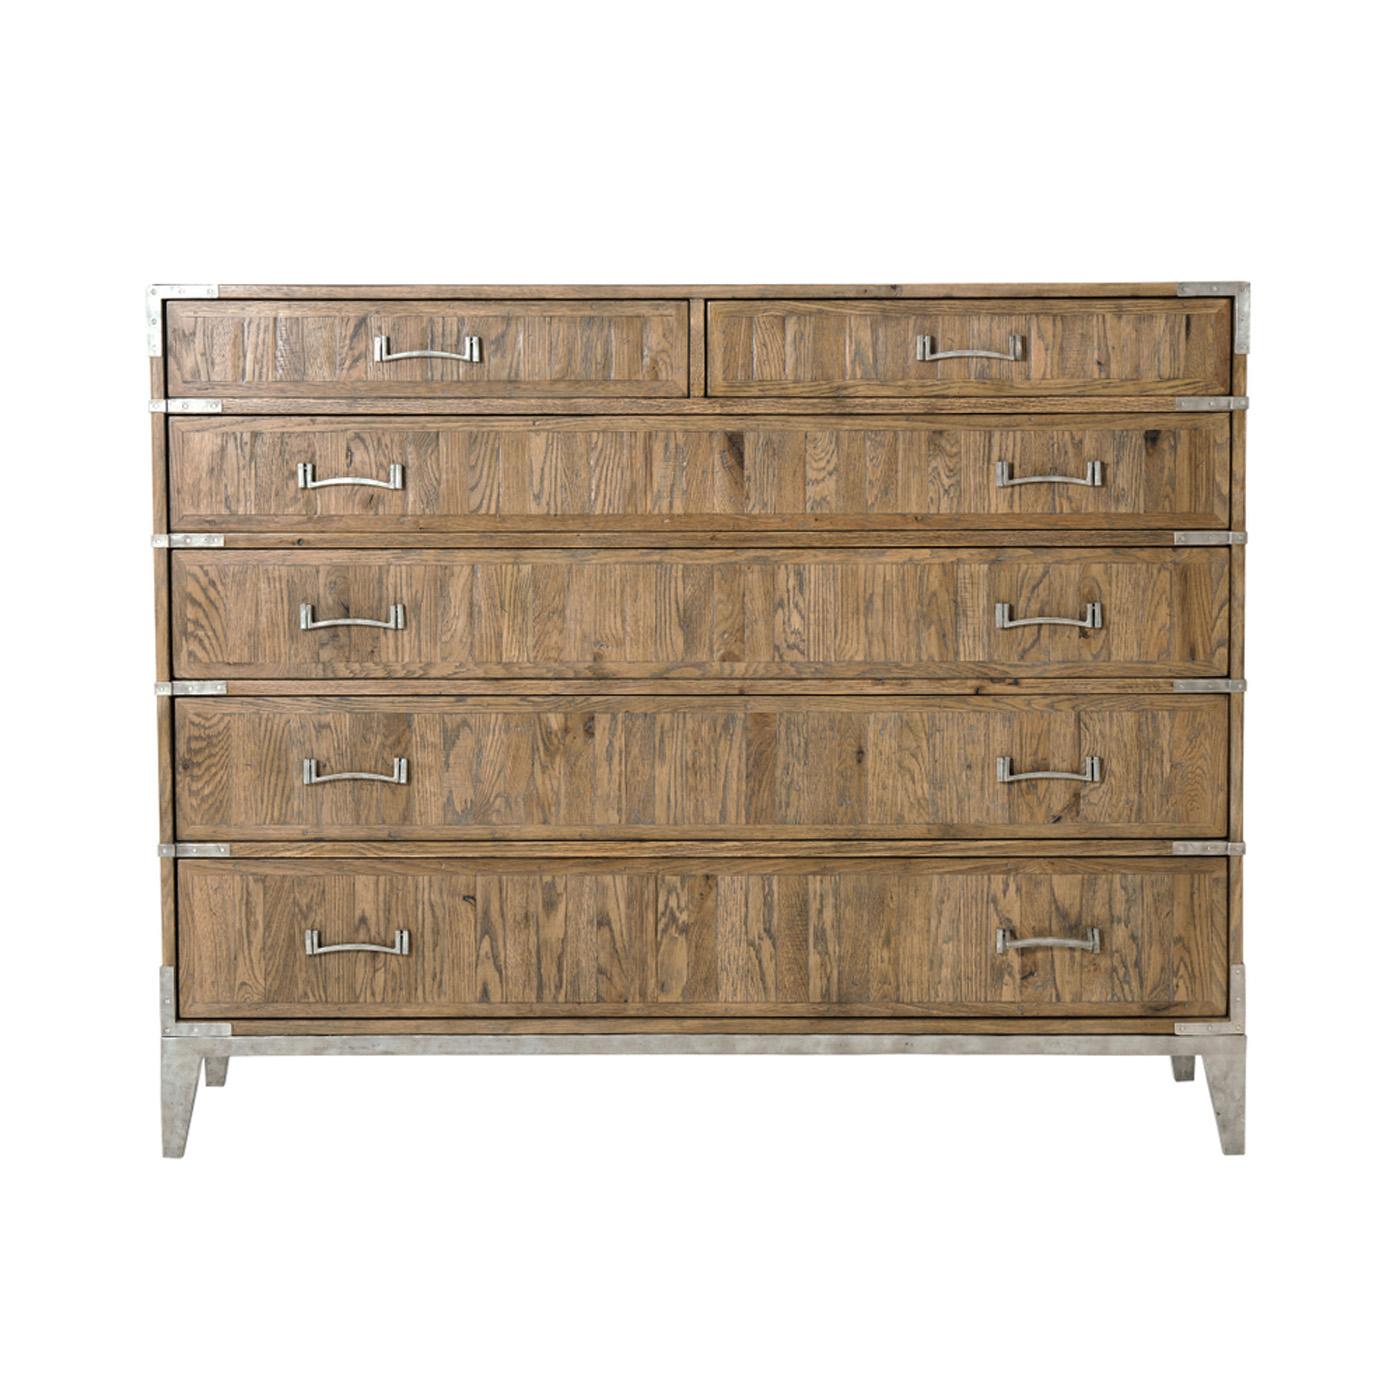 Modern rustic dresser constructed of oak and rustic oak parquetry with our 